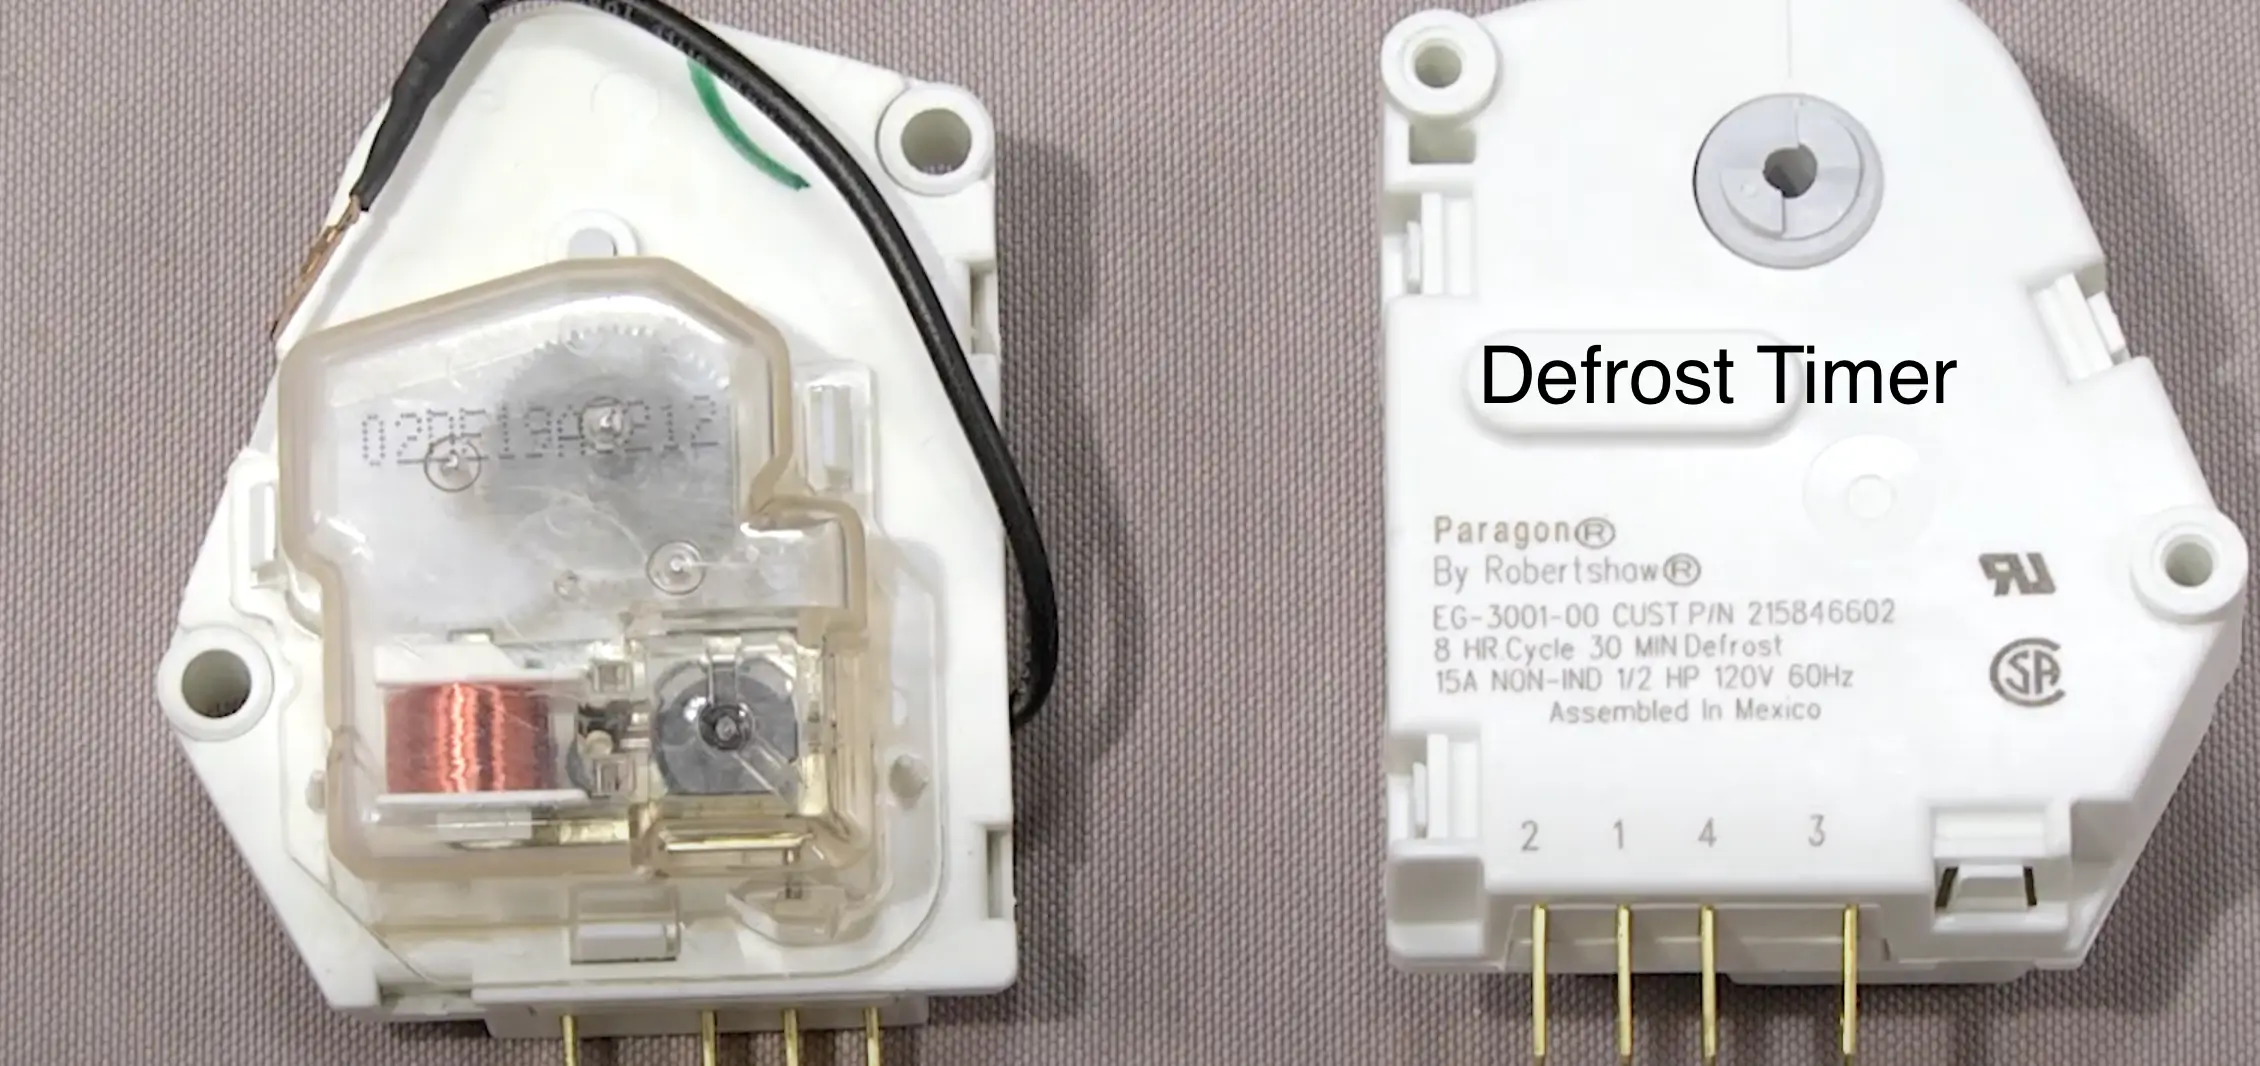 Image of defrost heater timer